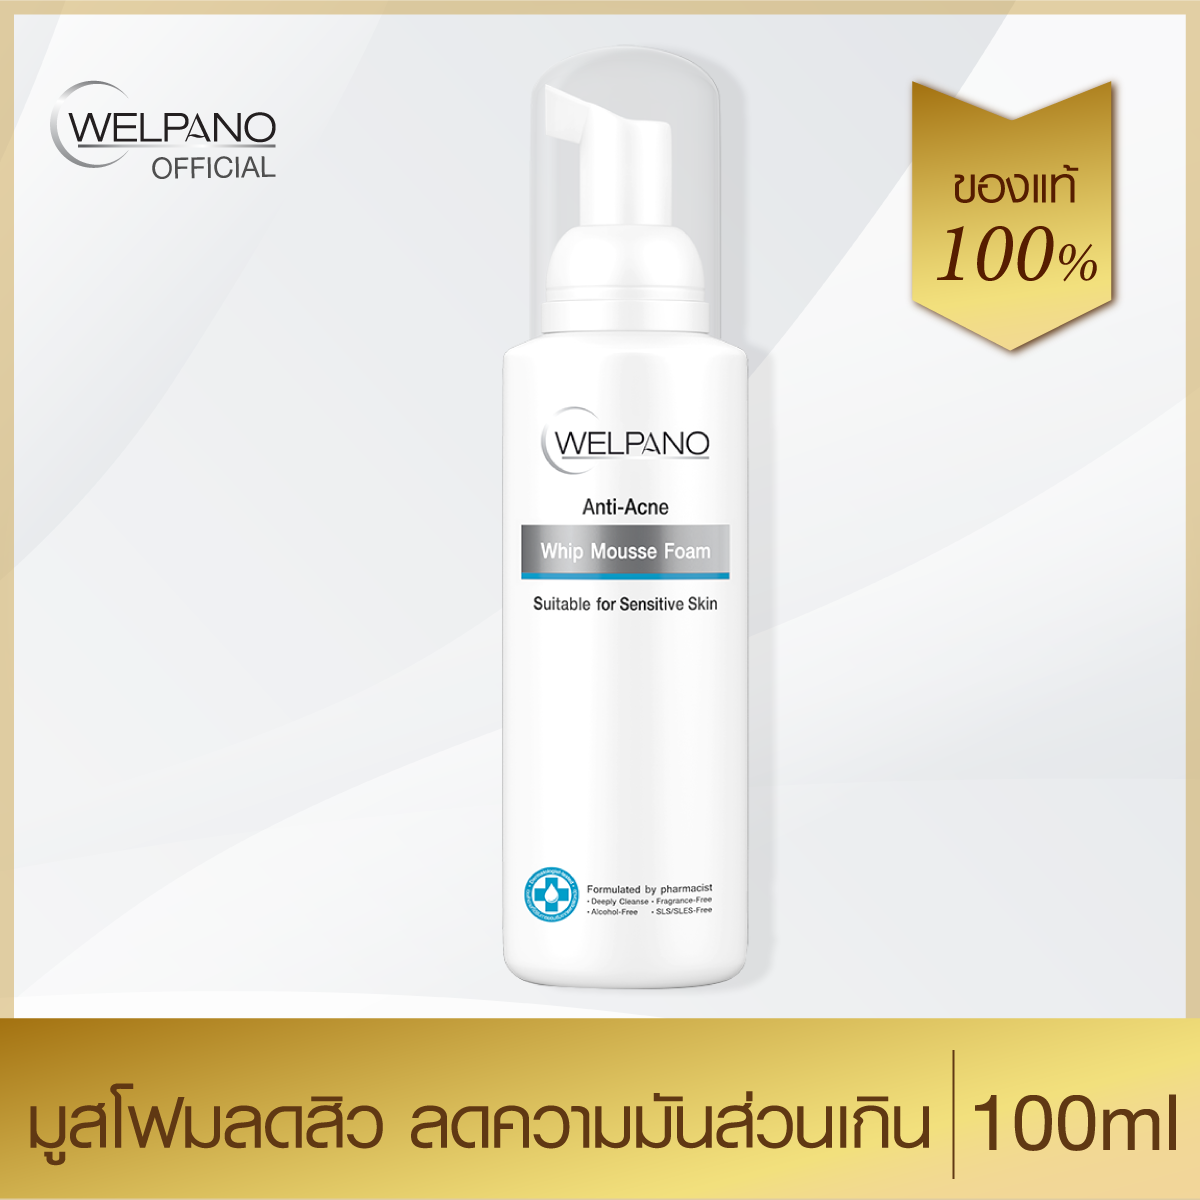 Welpano Anti-Acne Whip Mousse Foam